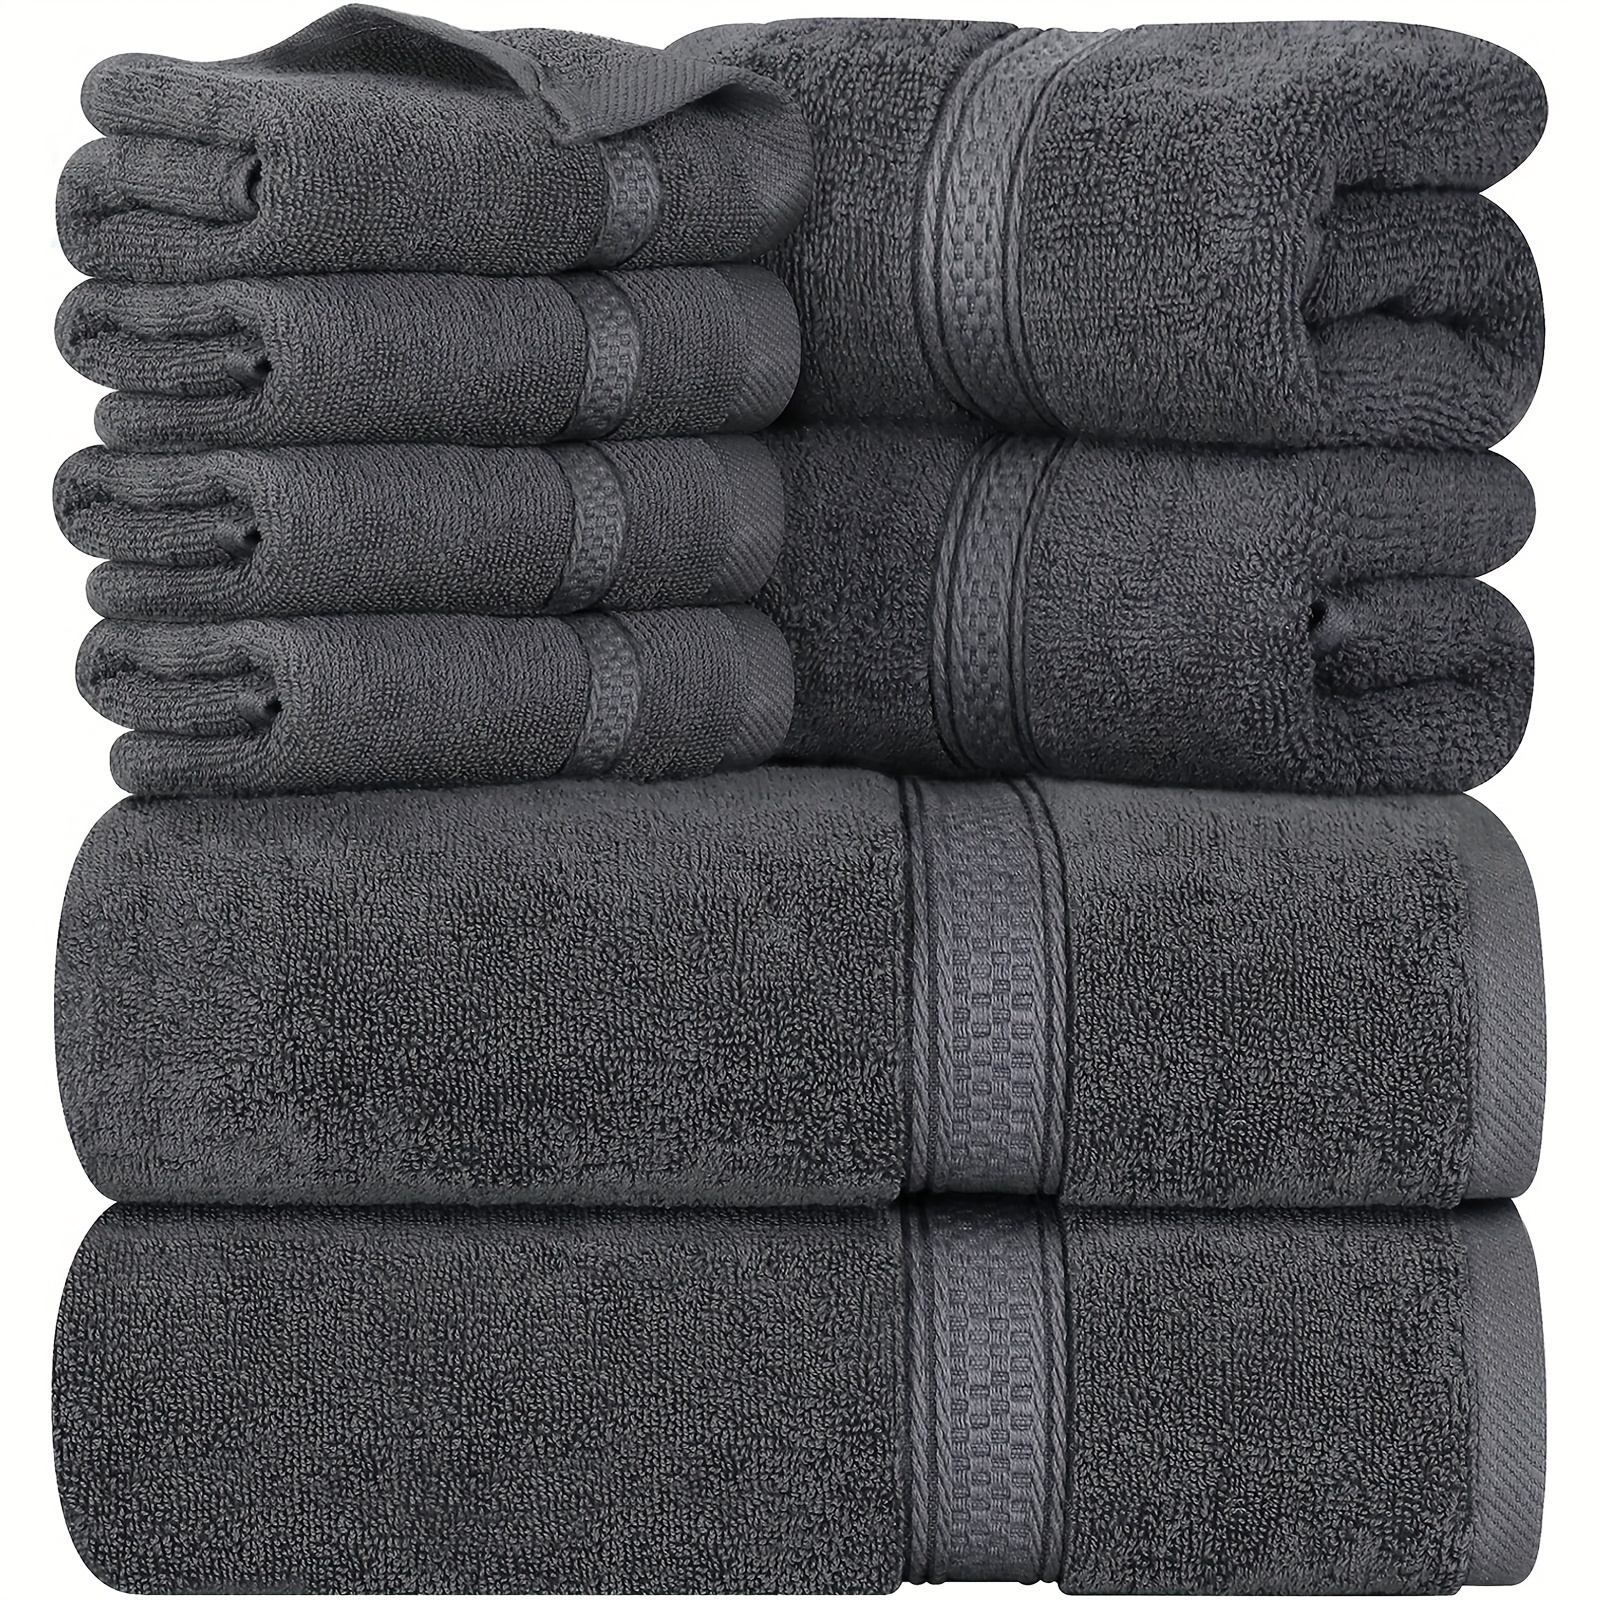 

8pcs Premium Towel Set, 2 Bath Towels, 2 Hand Towels, And 4 Washcloths, Highly Absorbent Towels For Bathroom, Gym, Hotel, And Spa (grey)